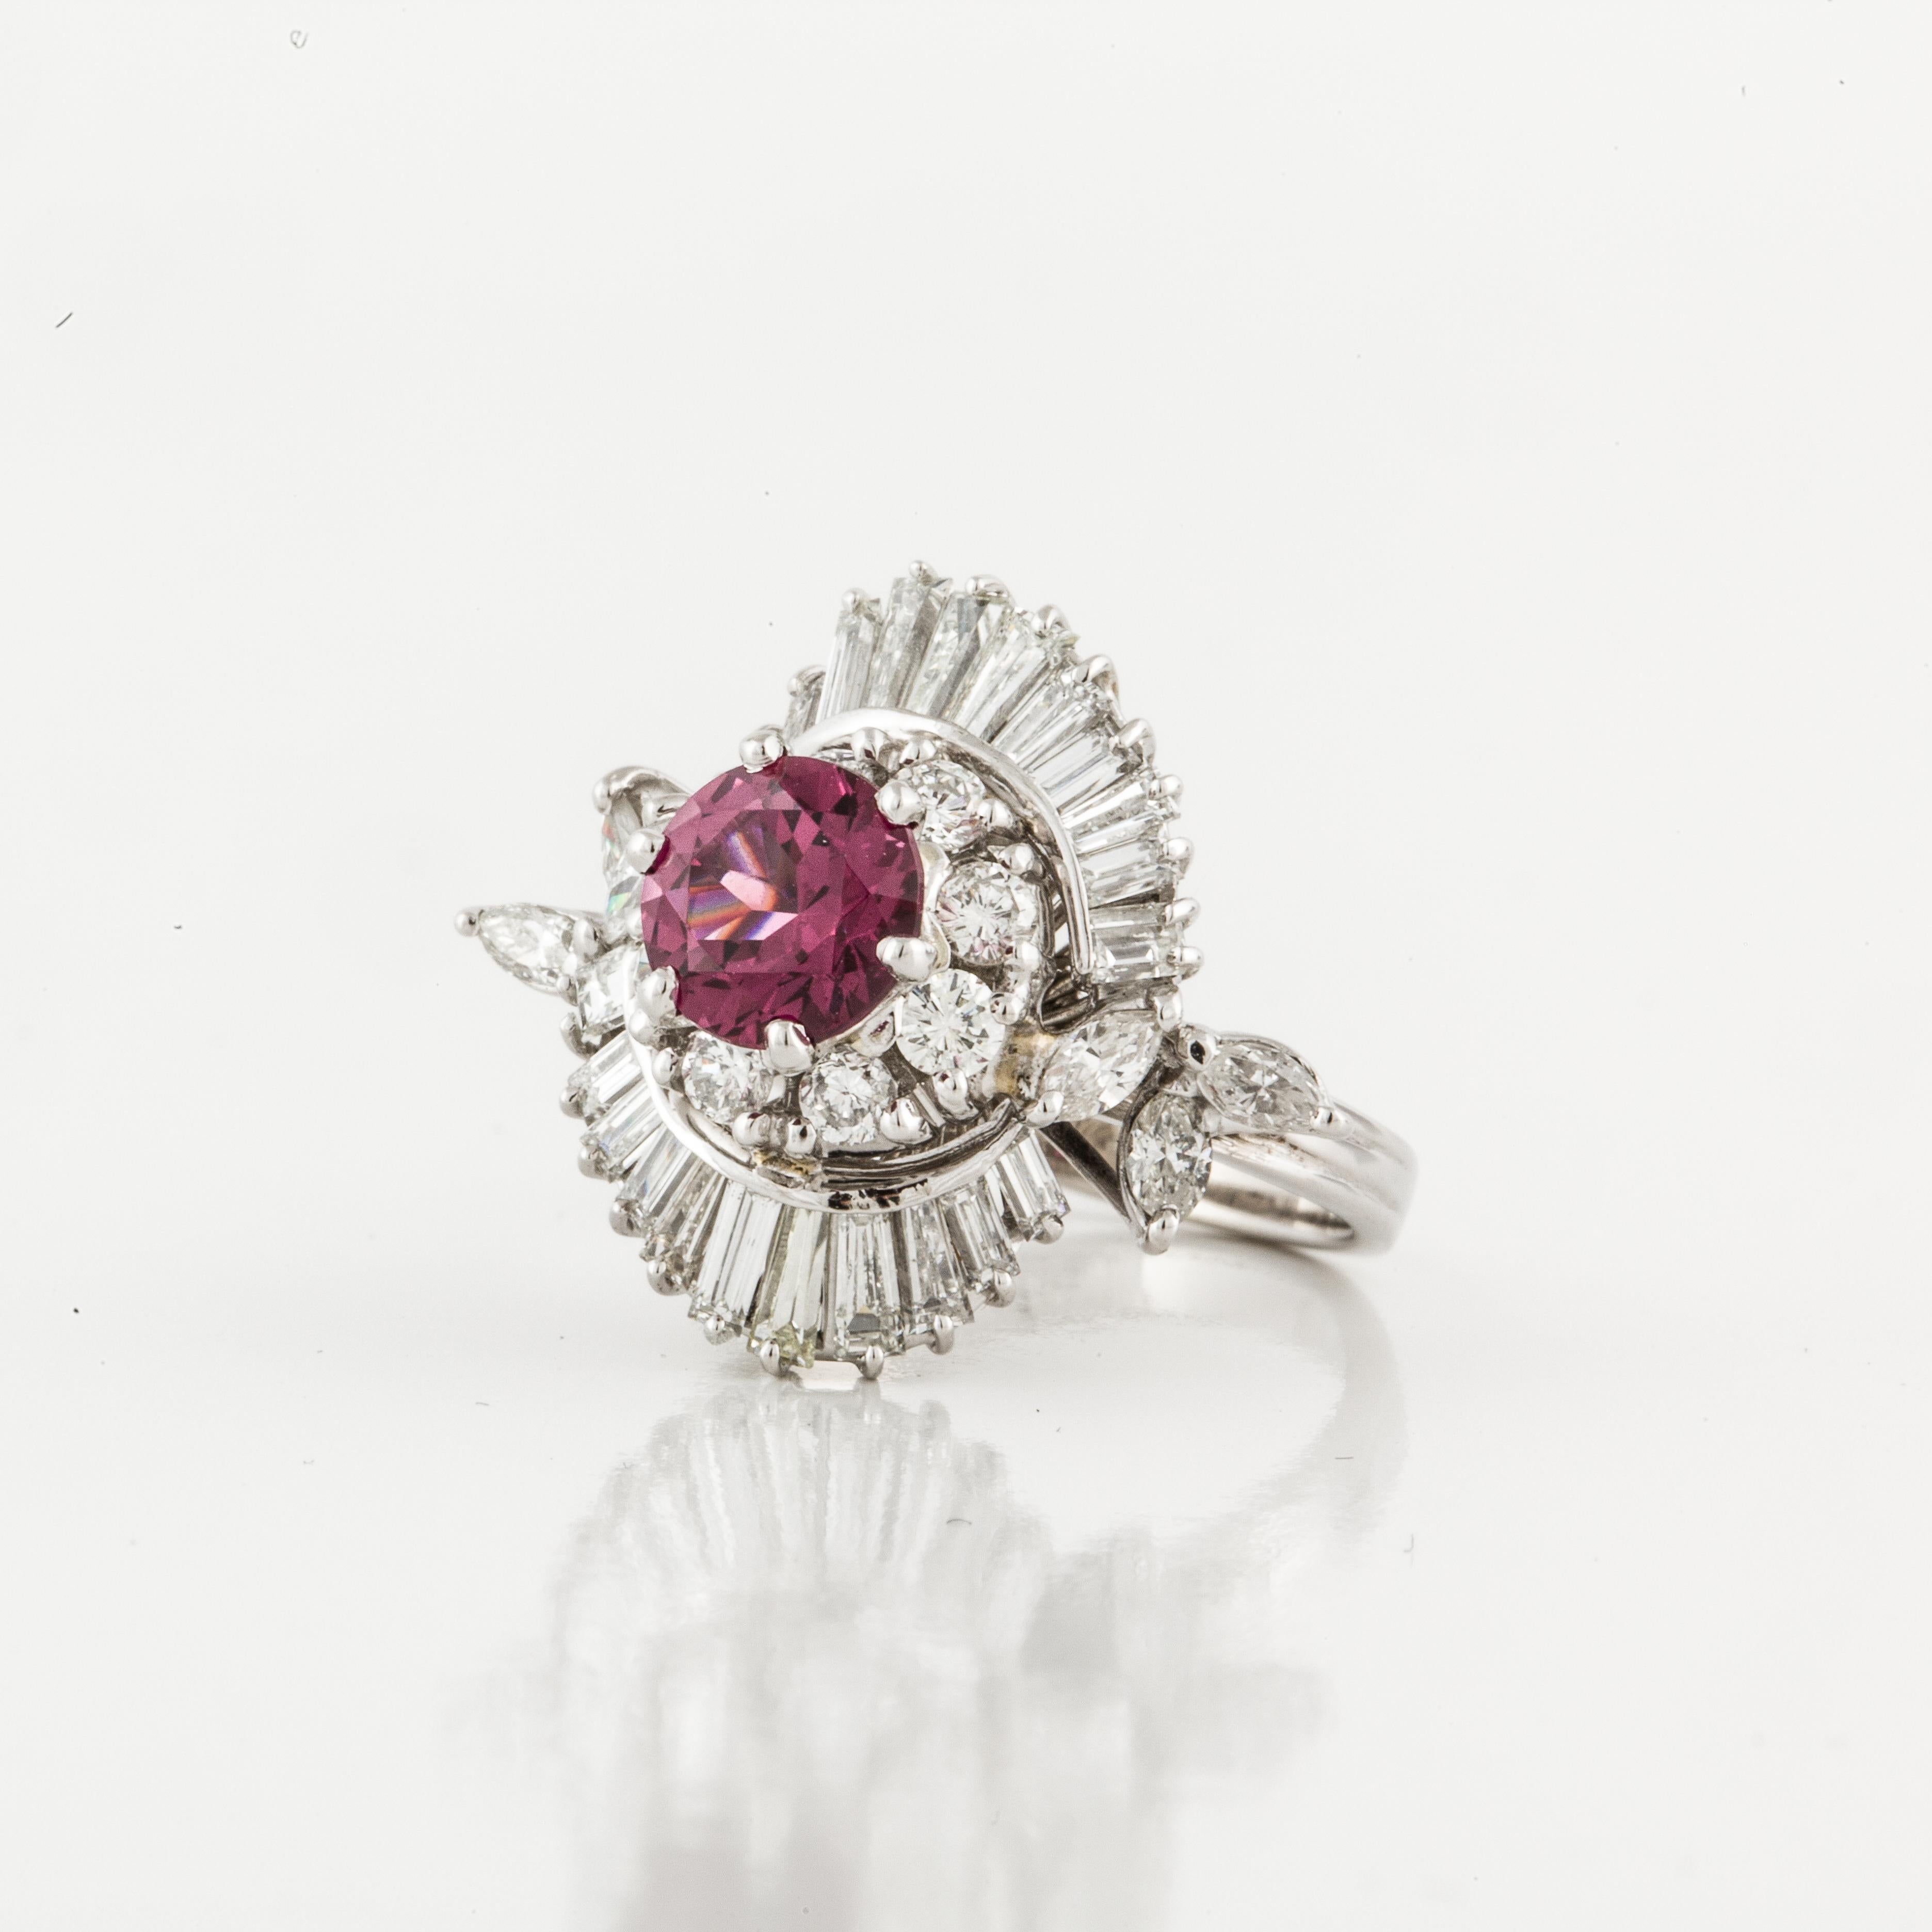 14K white gold cocktail ring featuring a round rhodolite garnet surrounded by round, baguette and marquise diamonds.  Total diamond weight is 1.30 carats.  The presentation area measures 1 inch by 7/8 inches and stands 1/2 inch off the finger.